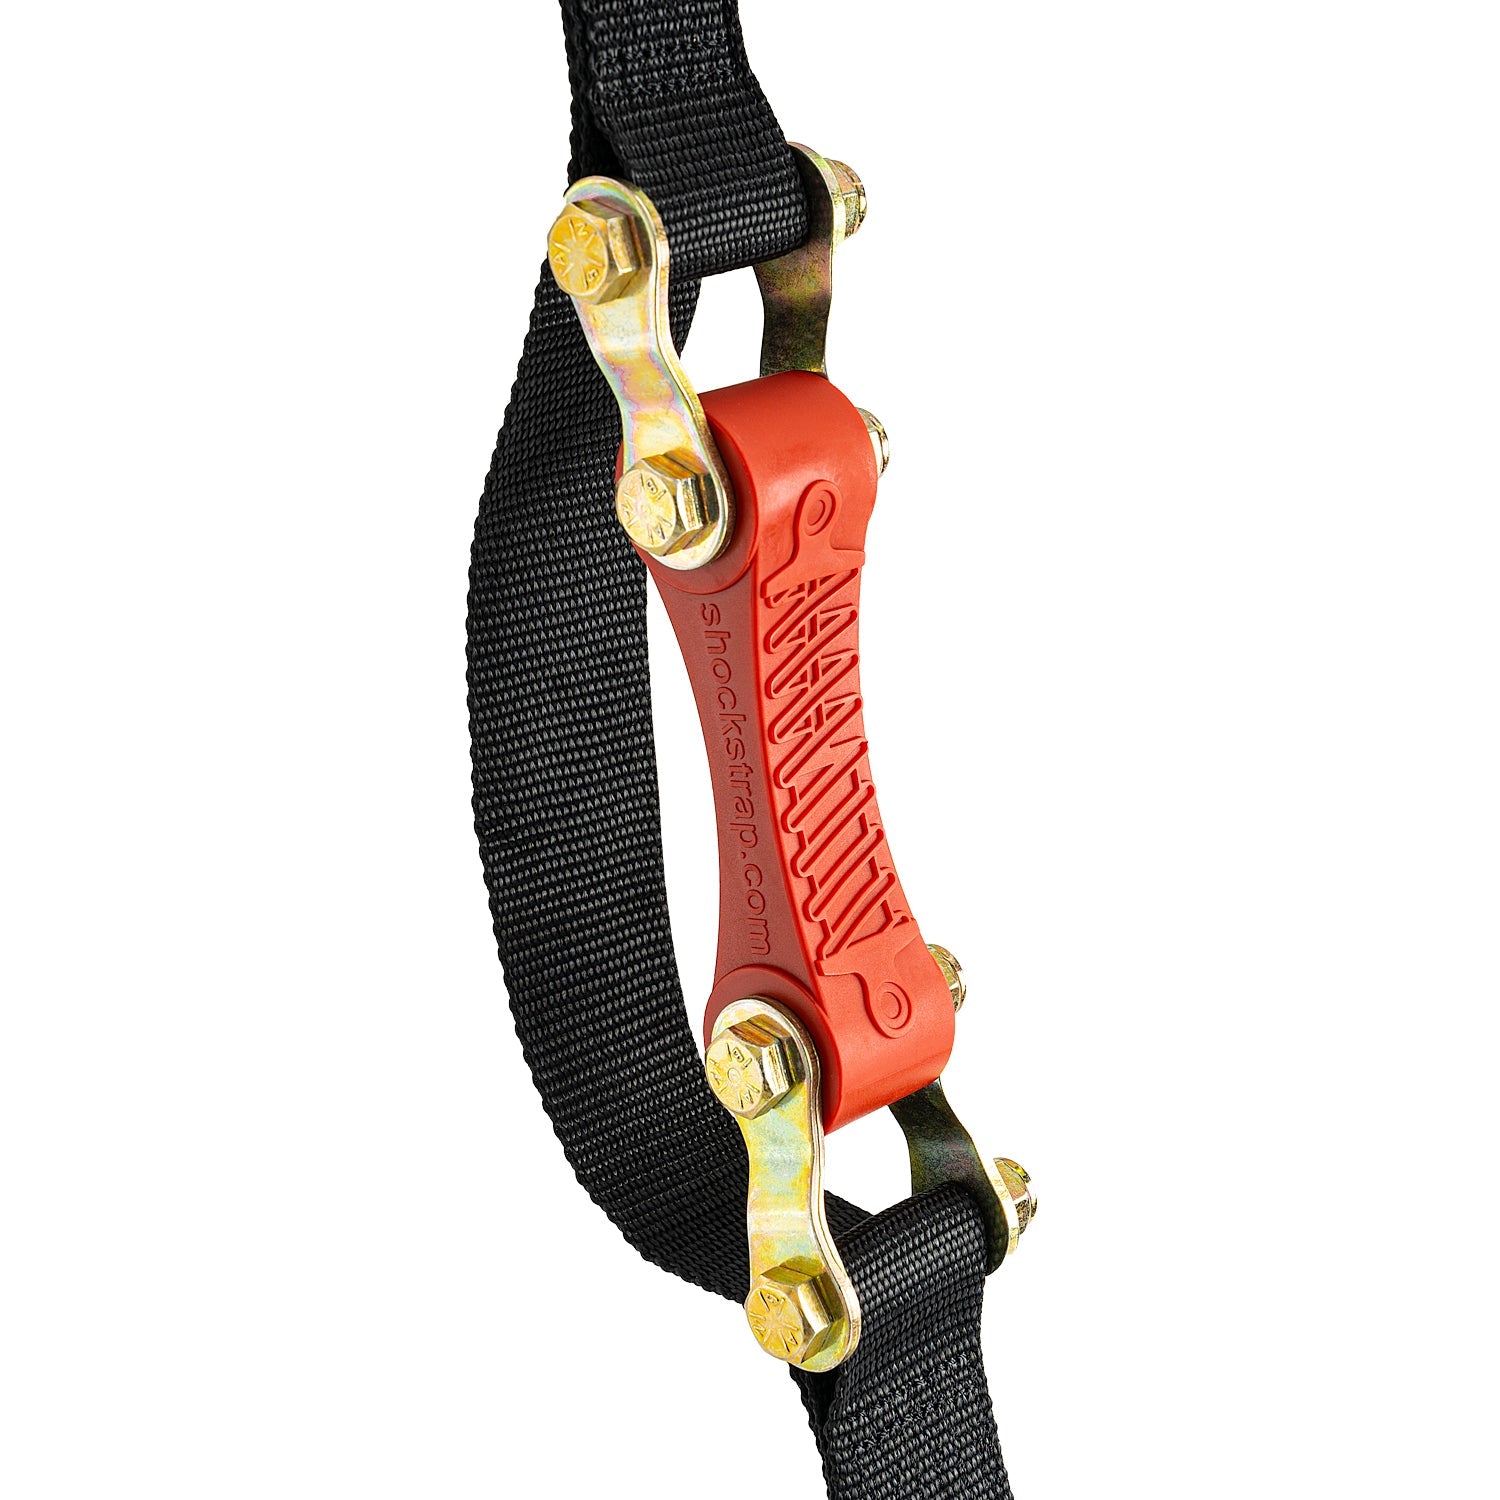 15ft x 1.5in ShockStrap Ratchet Strap, 1k WLL - The Perfect Bungee & ShockStrap Tie Downs